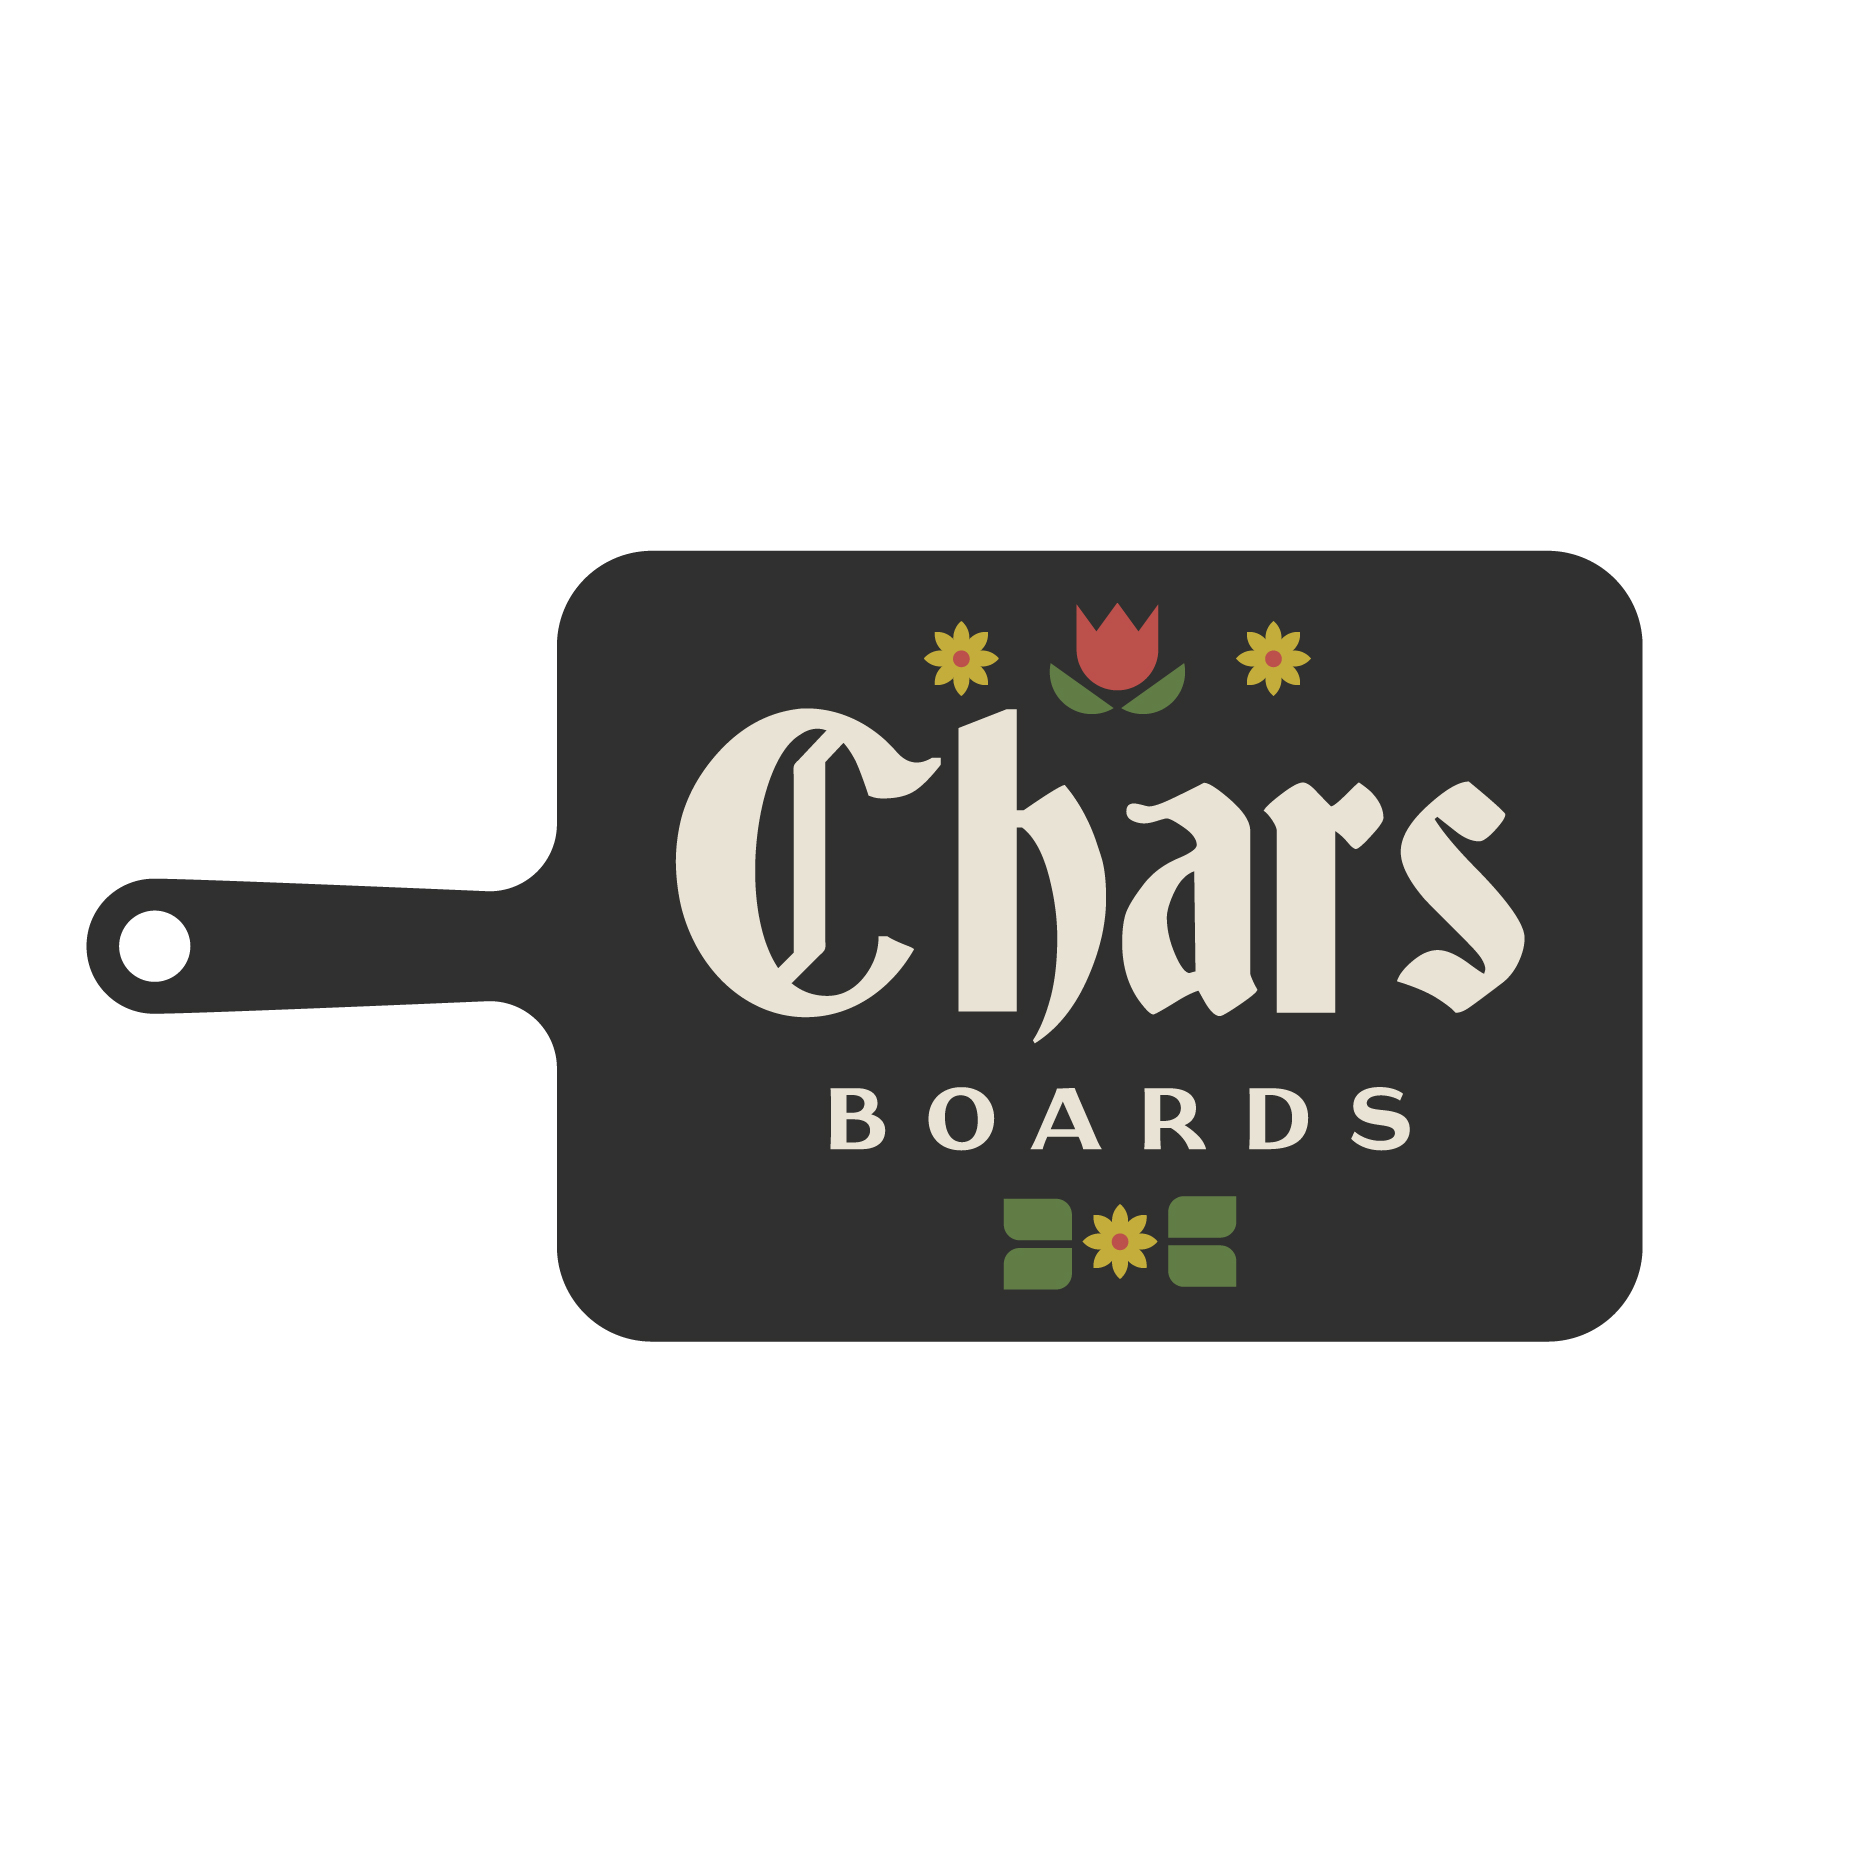 Chars Boards Charcuterie Logo logo design by logo designer Stellen Design for your inspiration and for the worlds largest logo competition